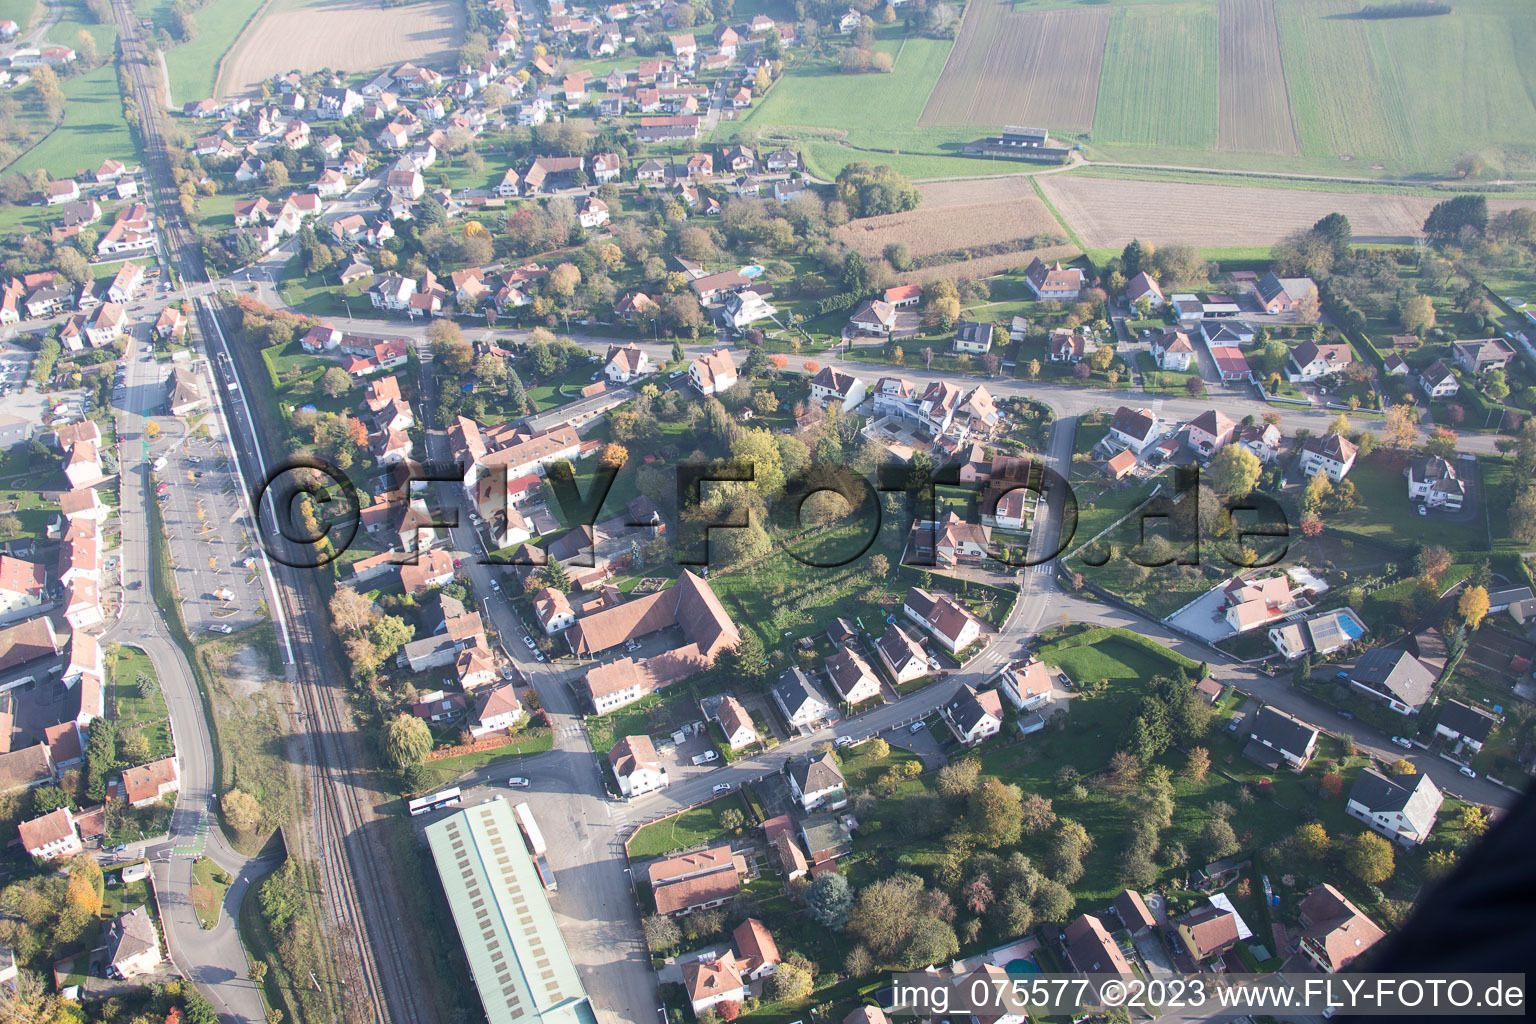 Aerial photograpy of Soultz-sous-Forêts in the state Bas-Rhin, France